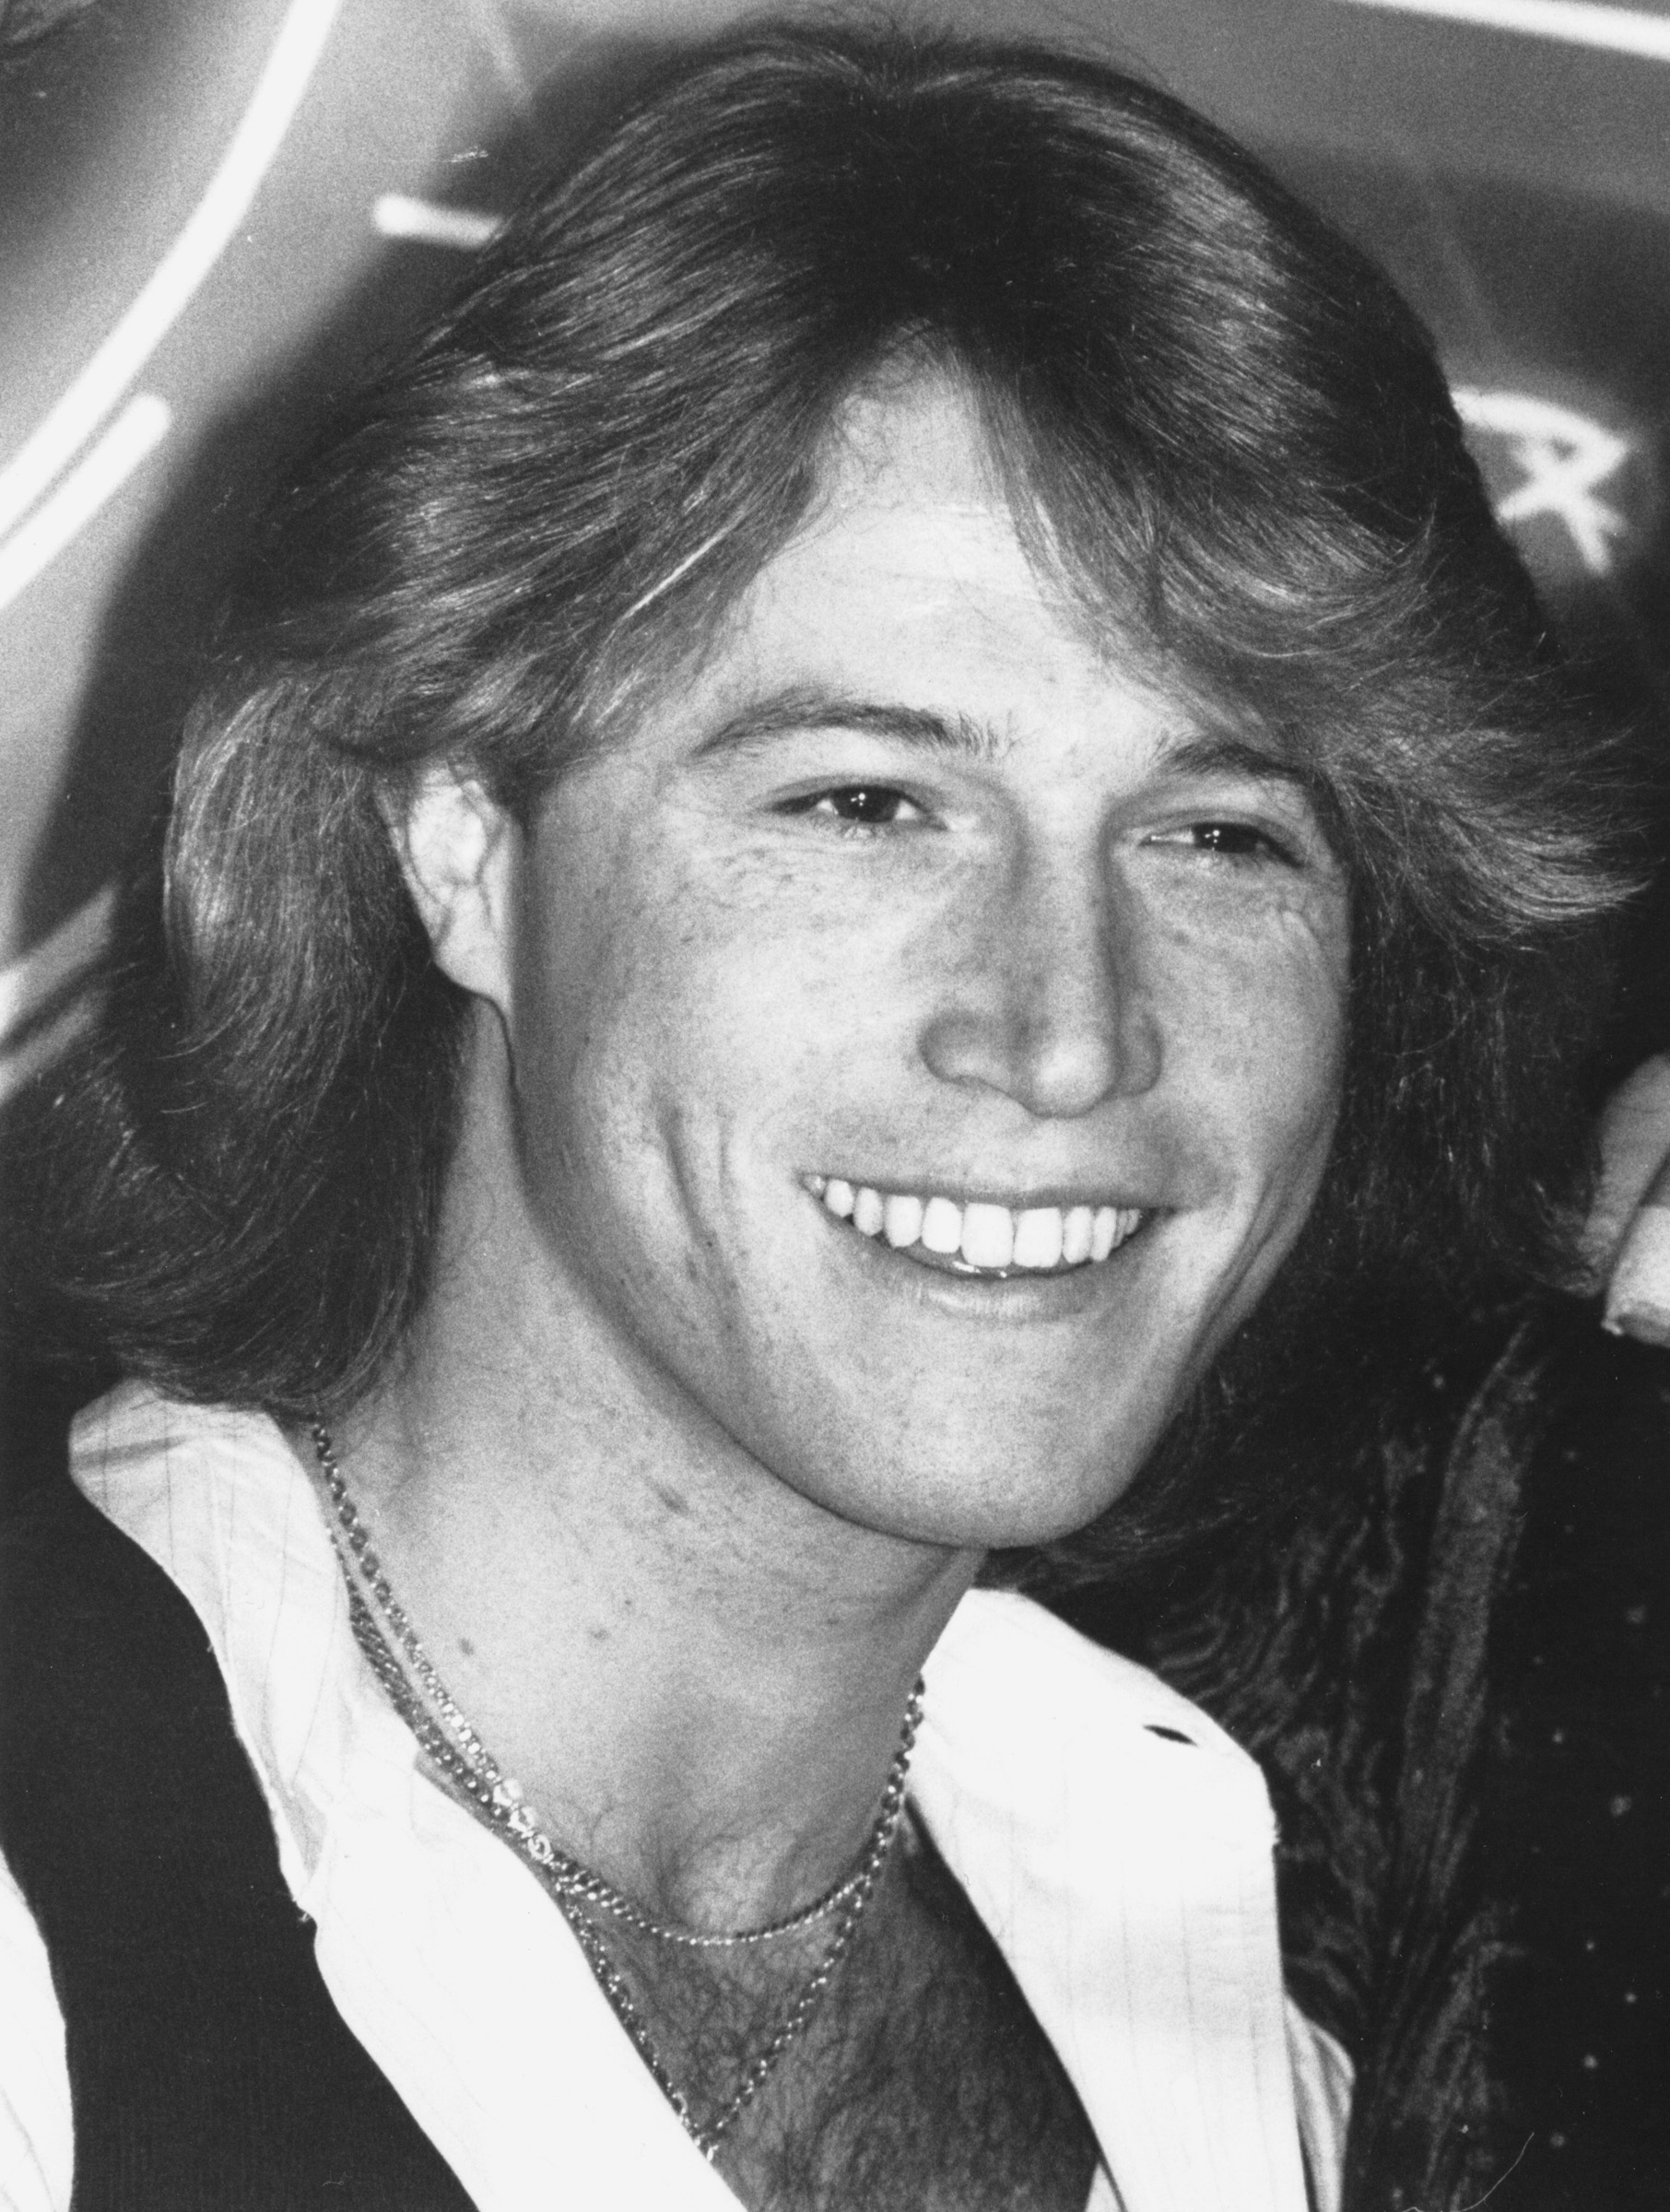 Andy Gibb at the 1979 UNICEF Show | Source: Getty Images